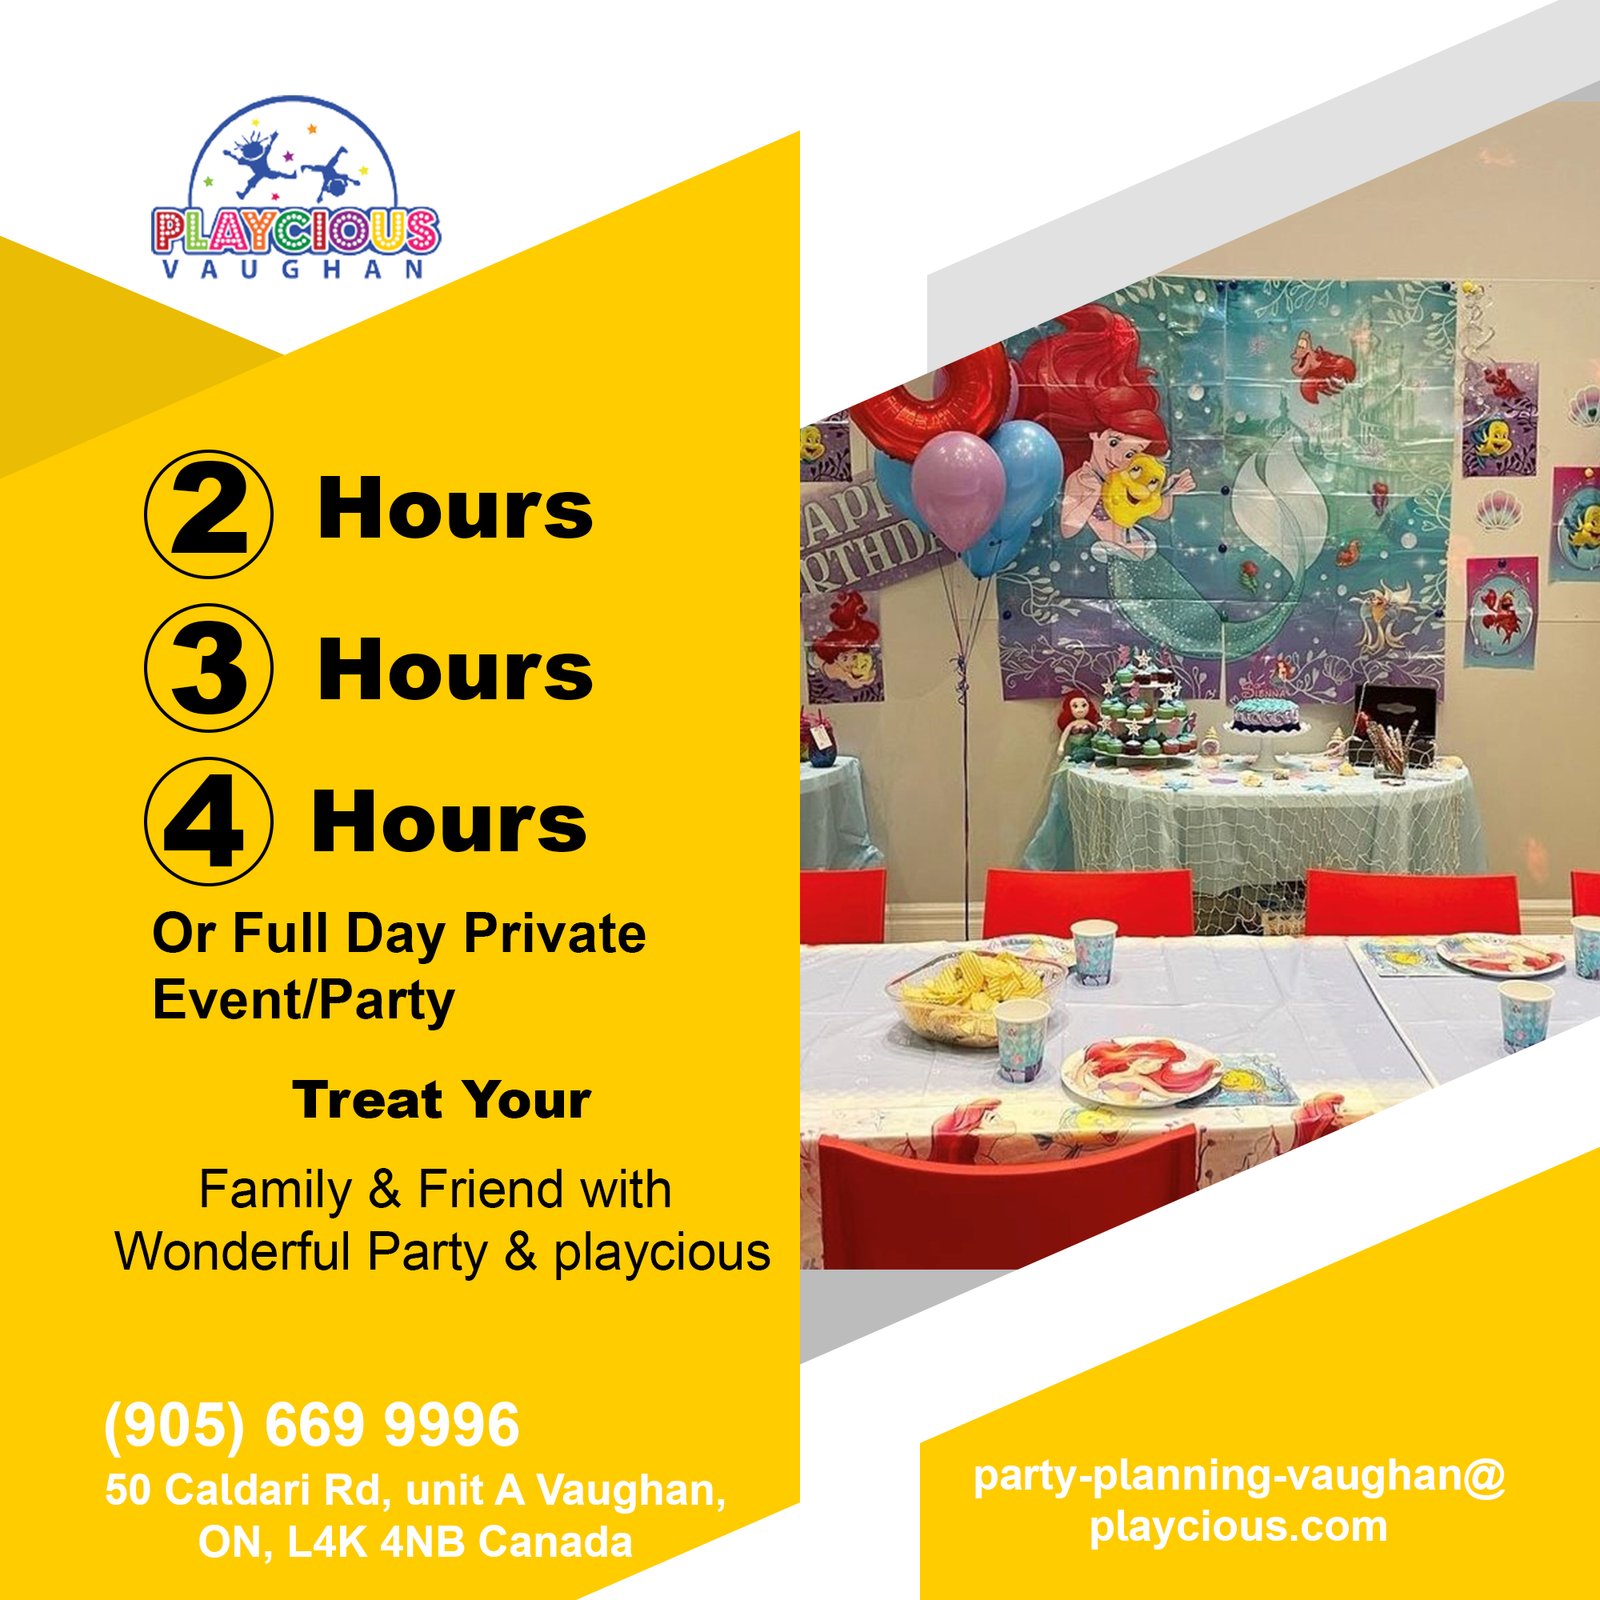 Be Ready and Book 2-Hour, 3-Hour, 4-hour or Full day Party/Event.
Playcious best place for Fun and Parties.

For more details give us a call on
(905) 669 9996
Or visit:
party-planning-vaughan@playcious.com
50 Caldari Rd, Unit A Vaughan

#playcious #vaughan #timetoplay #sanitize #club #celebration #birthdayparty #birthday #party #dance #birthday #instagood
#kidparties #kidsparty #birthdayparty #houstoneventplanner #houstonevents #houstonparties #eventplanner #firstbirthday #babyshower #toddlerparty #customtreats #weddings #babyshowers #babyparty